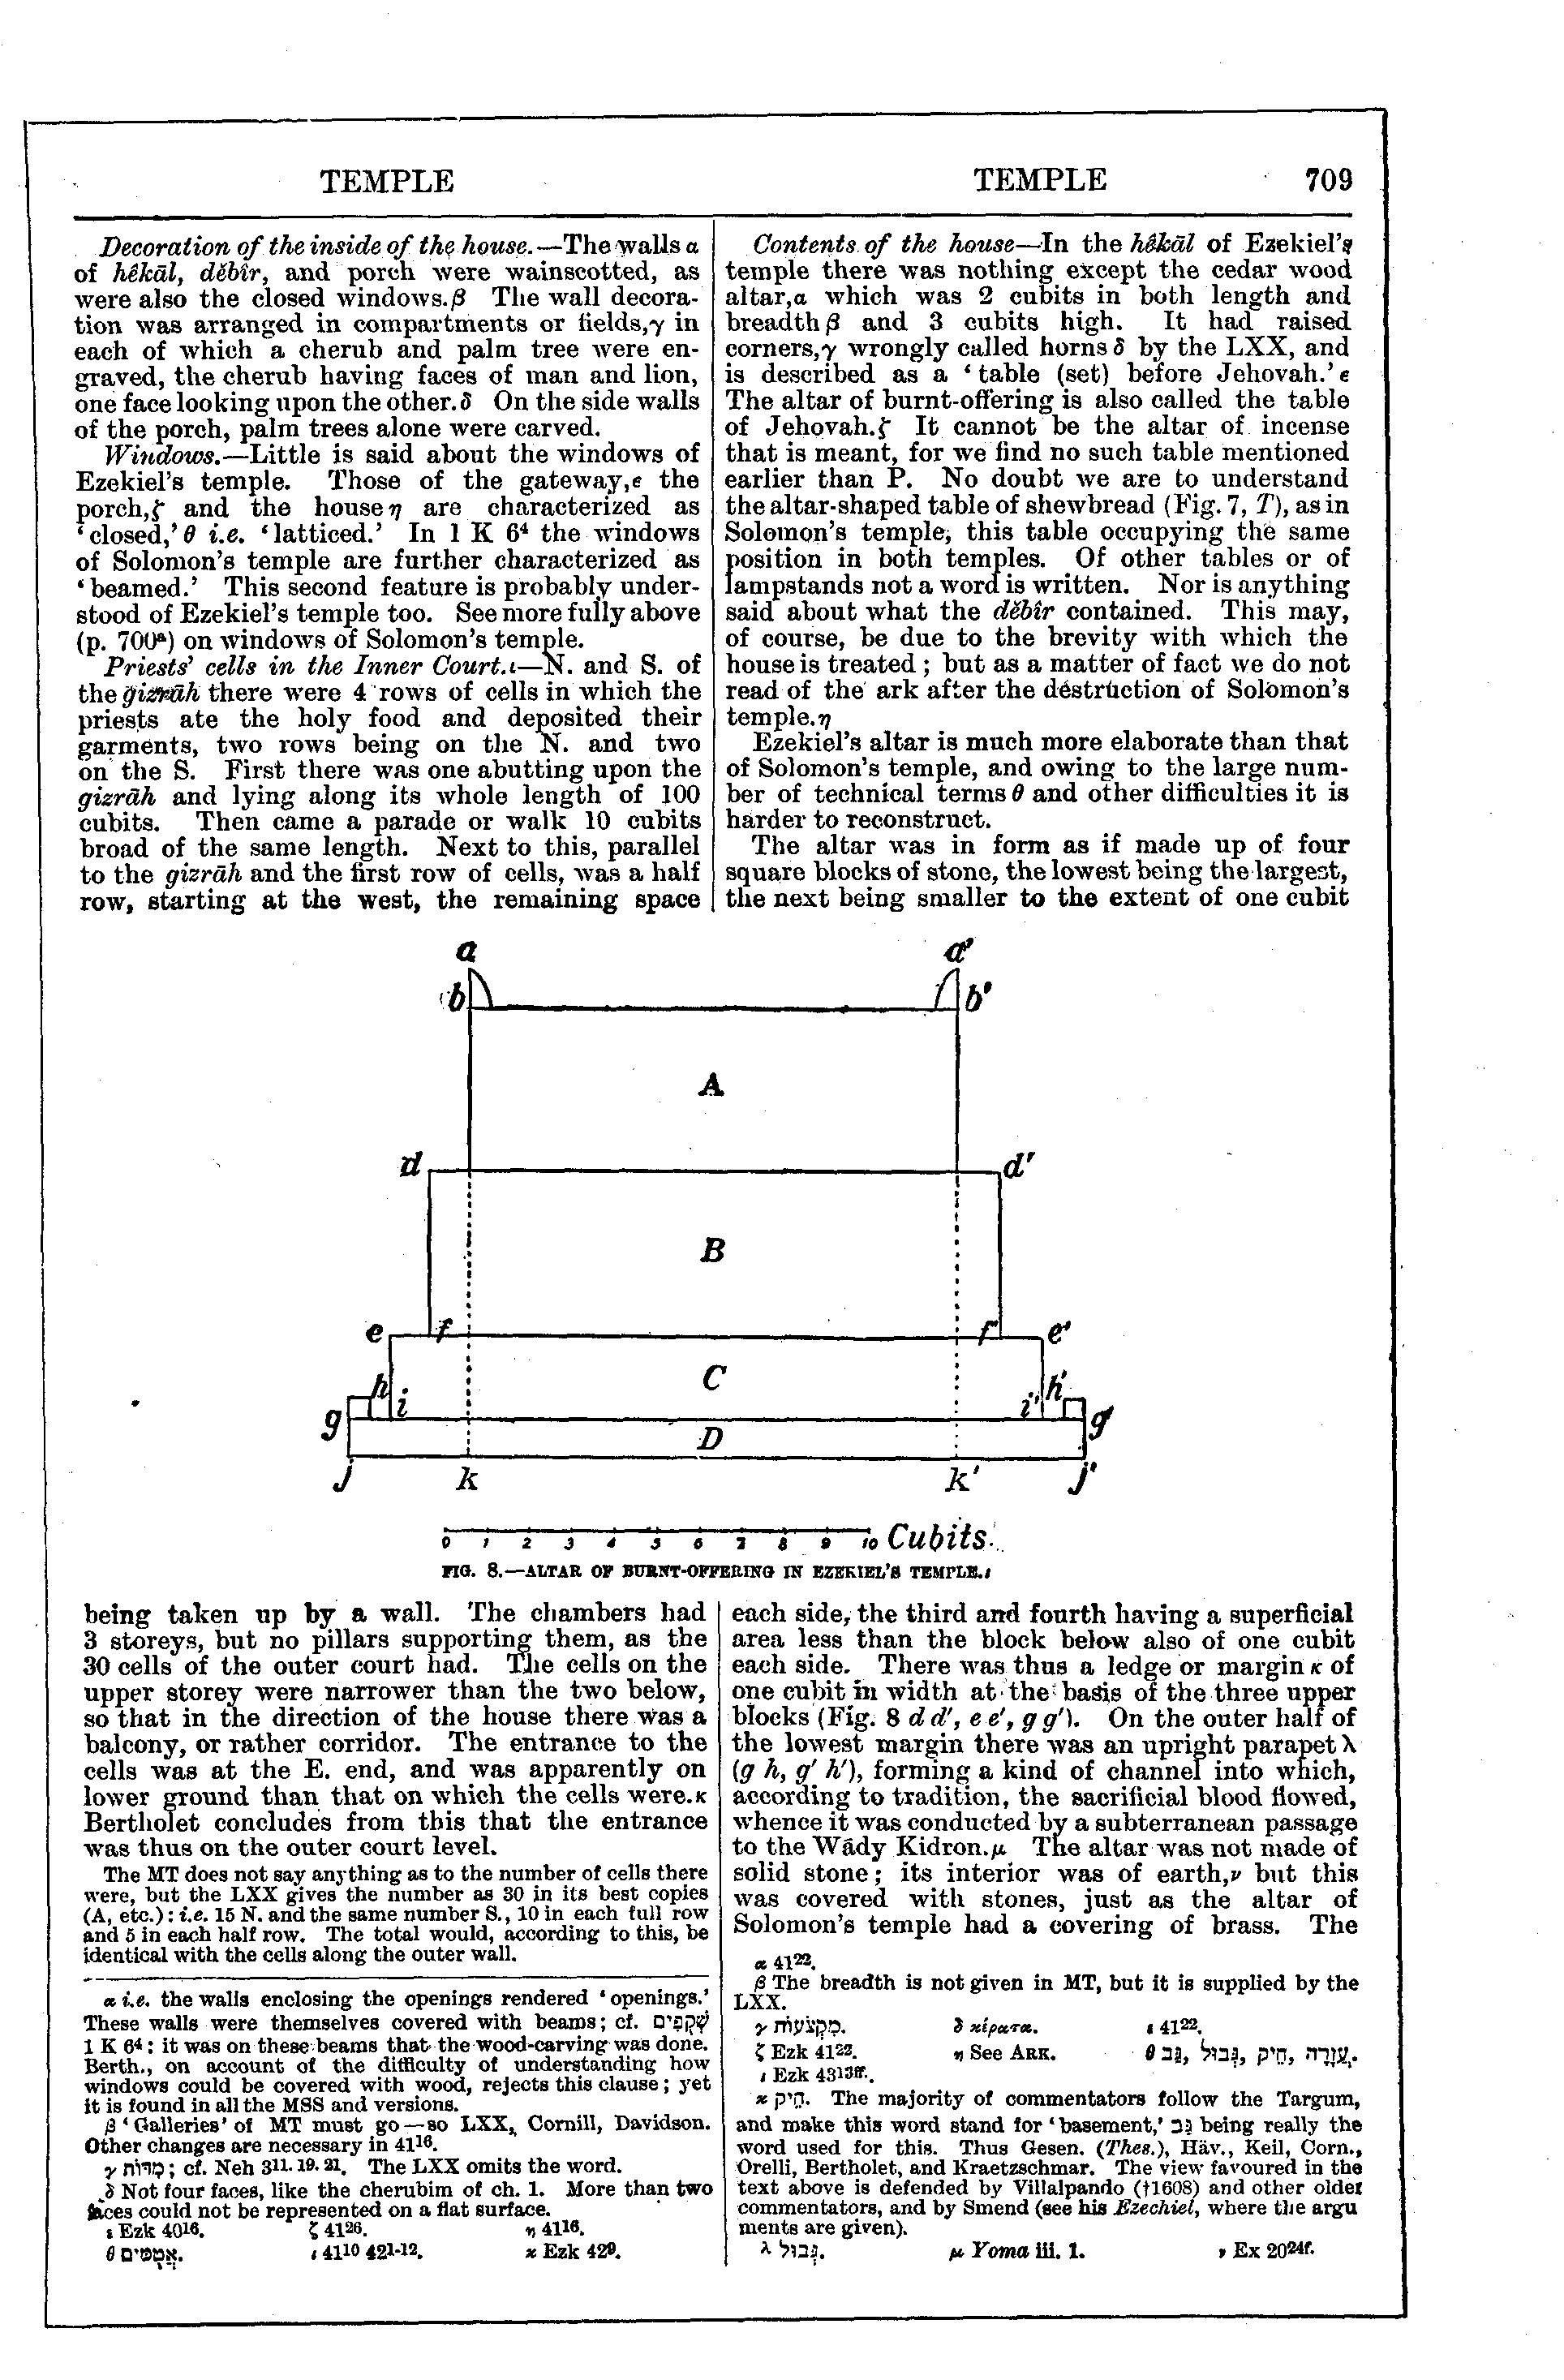 Image of page 709